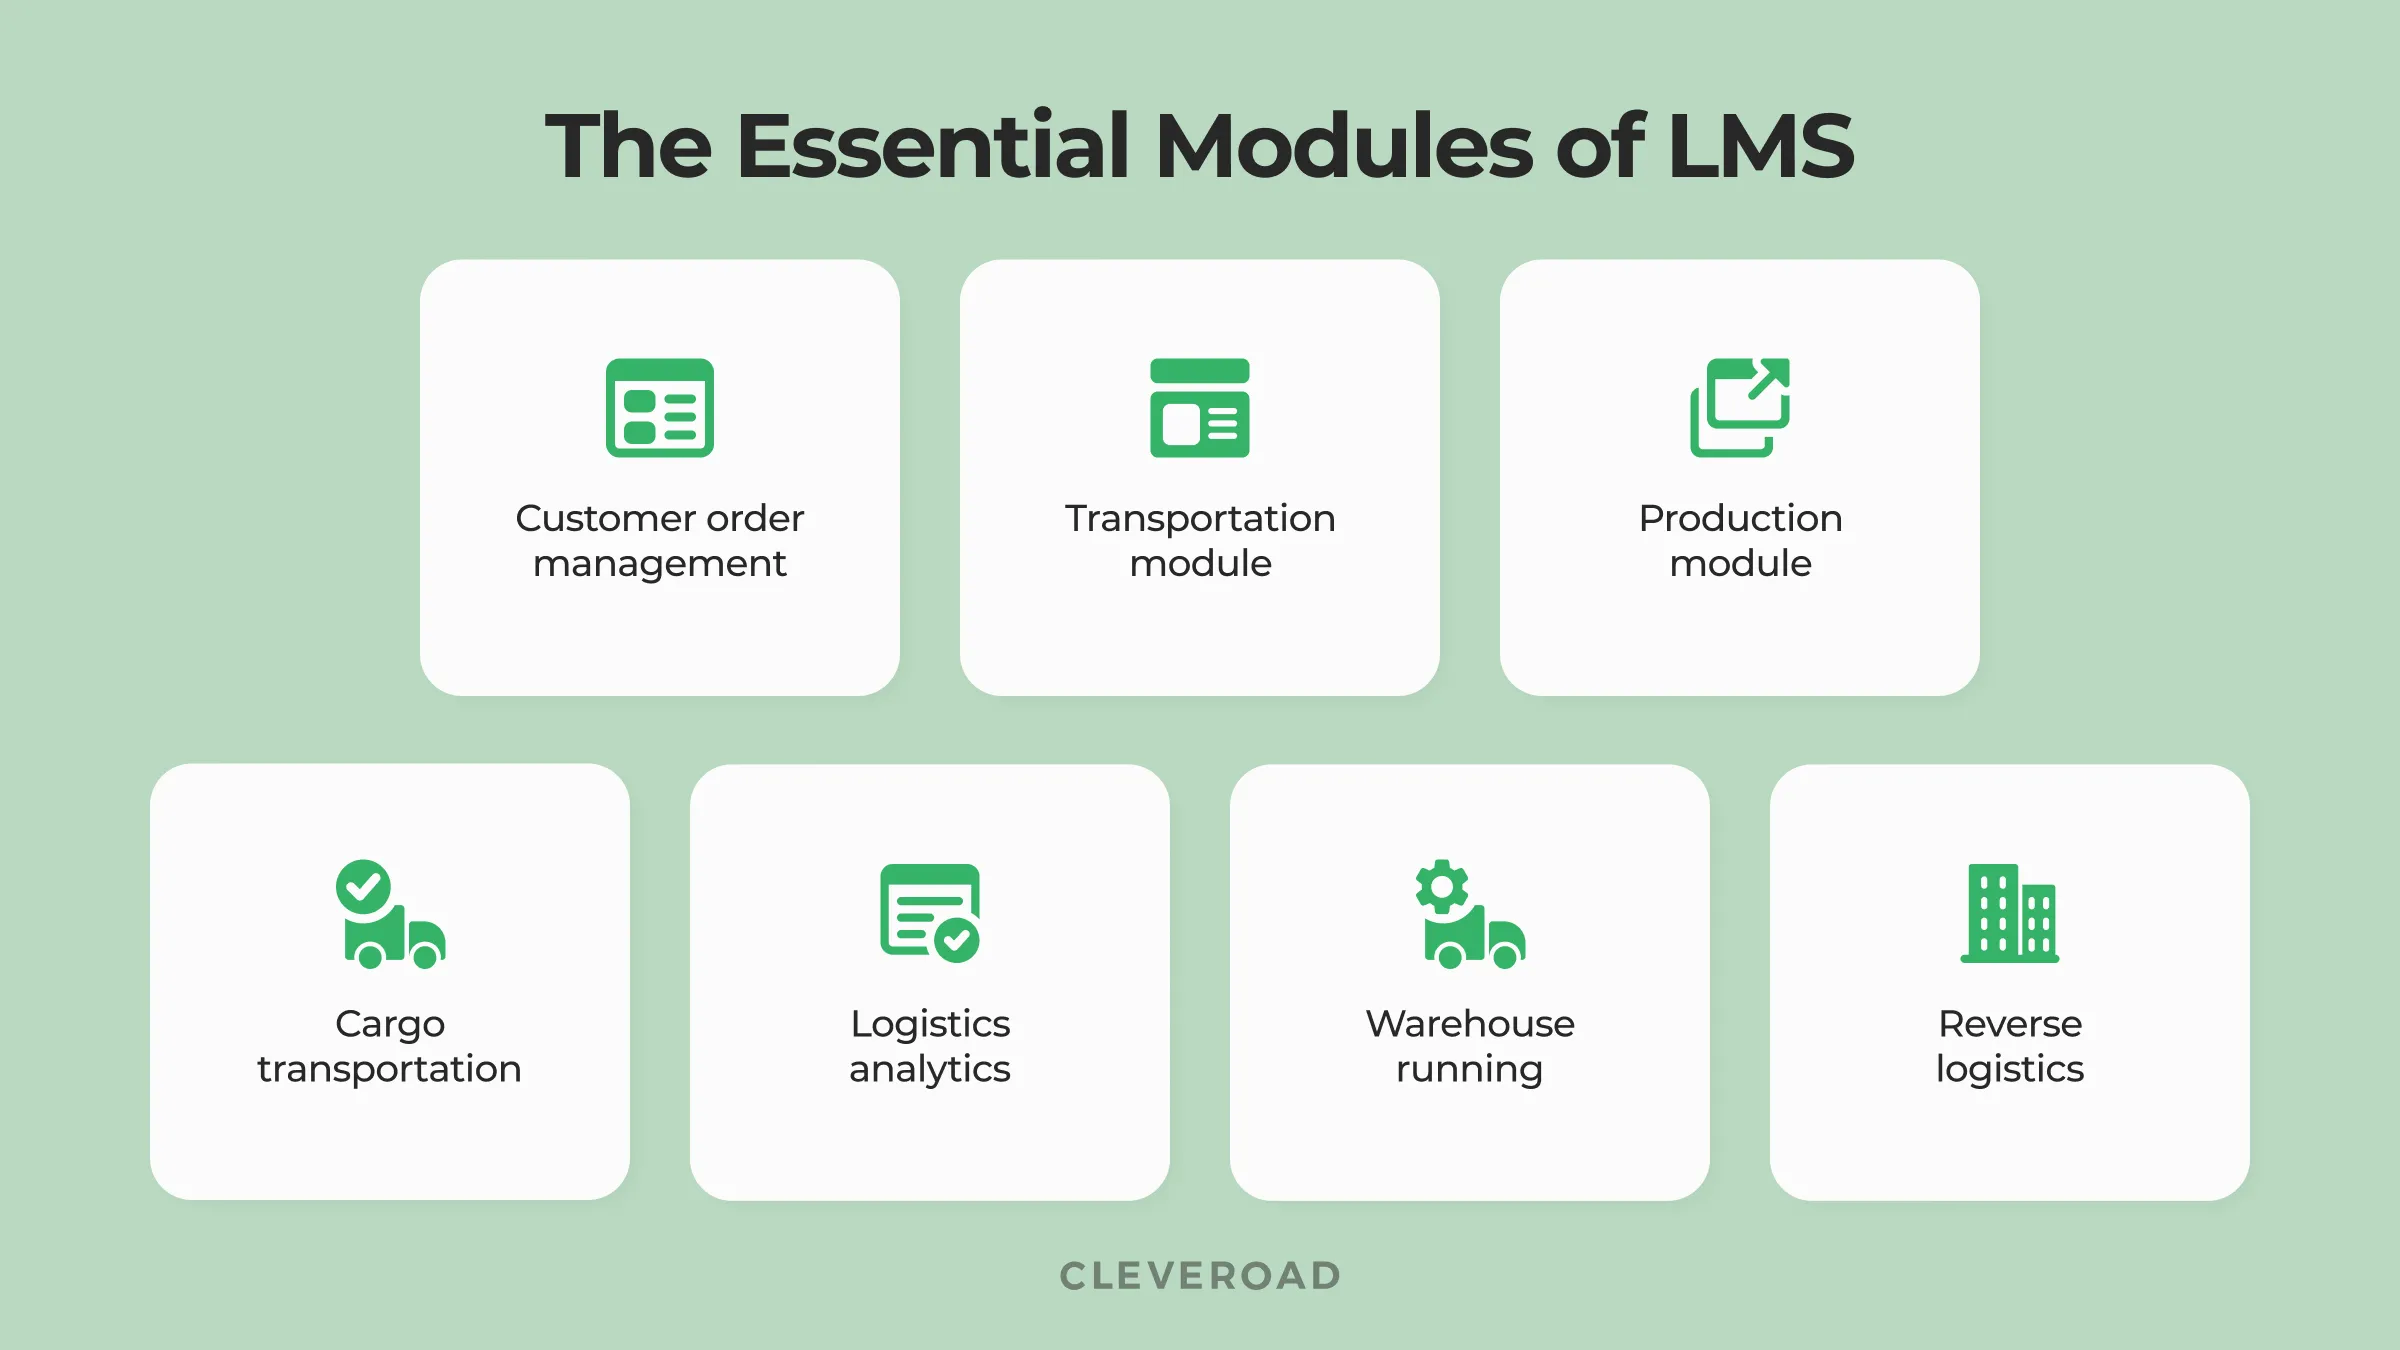 The essential modules of logistics management system